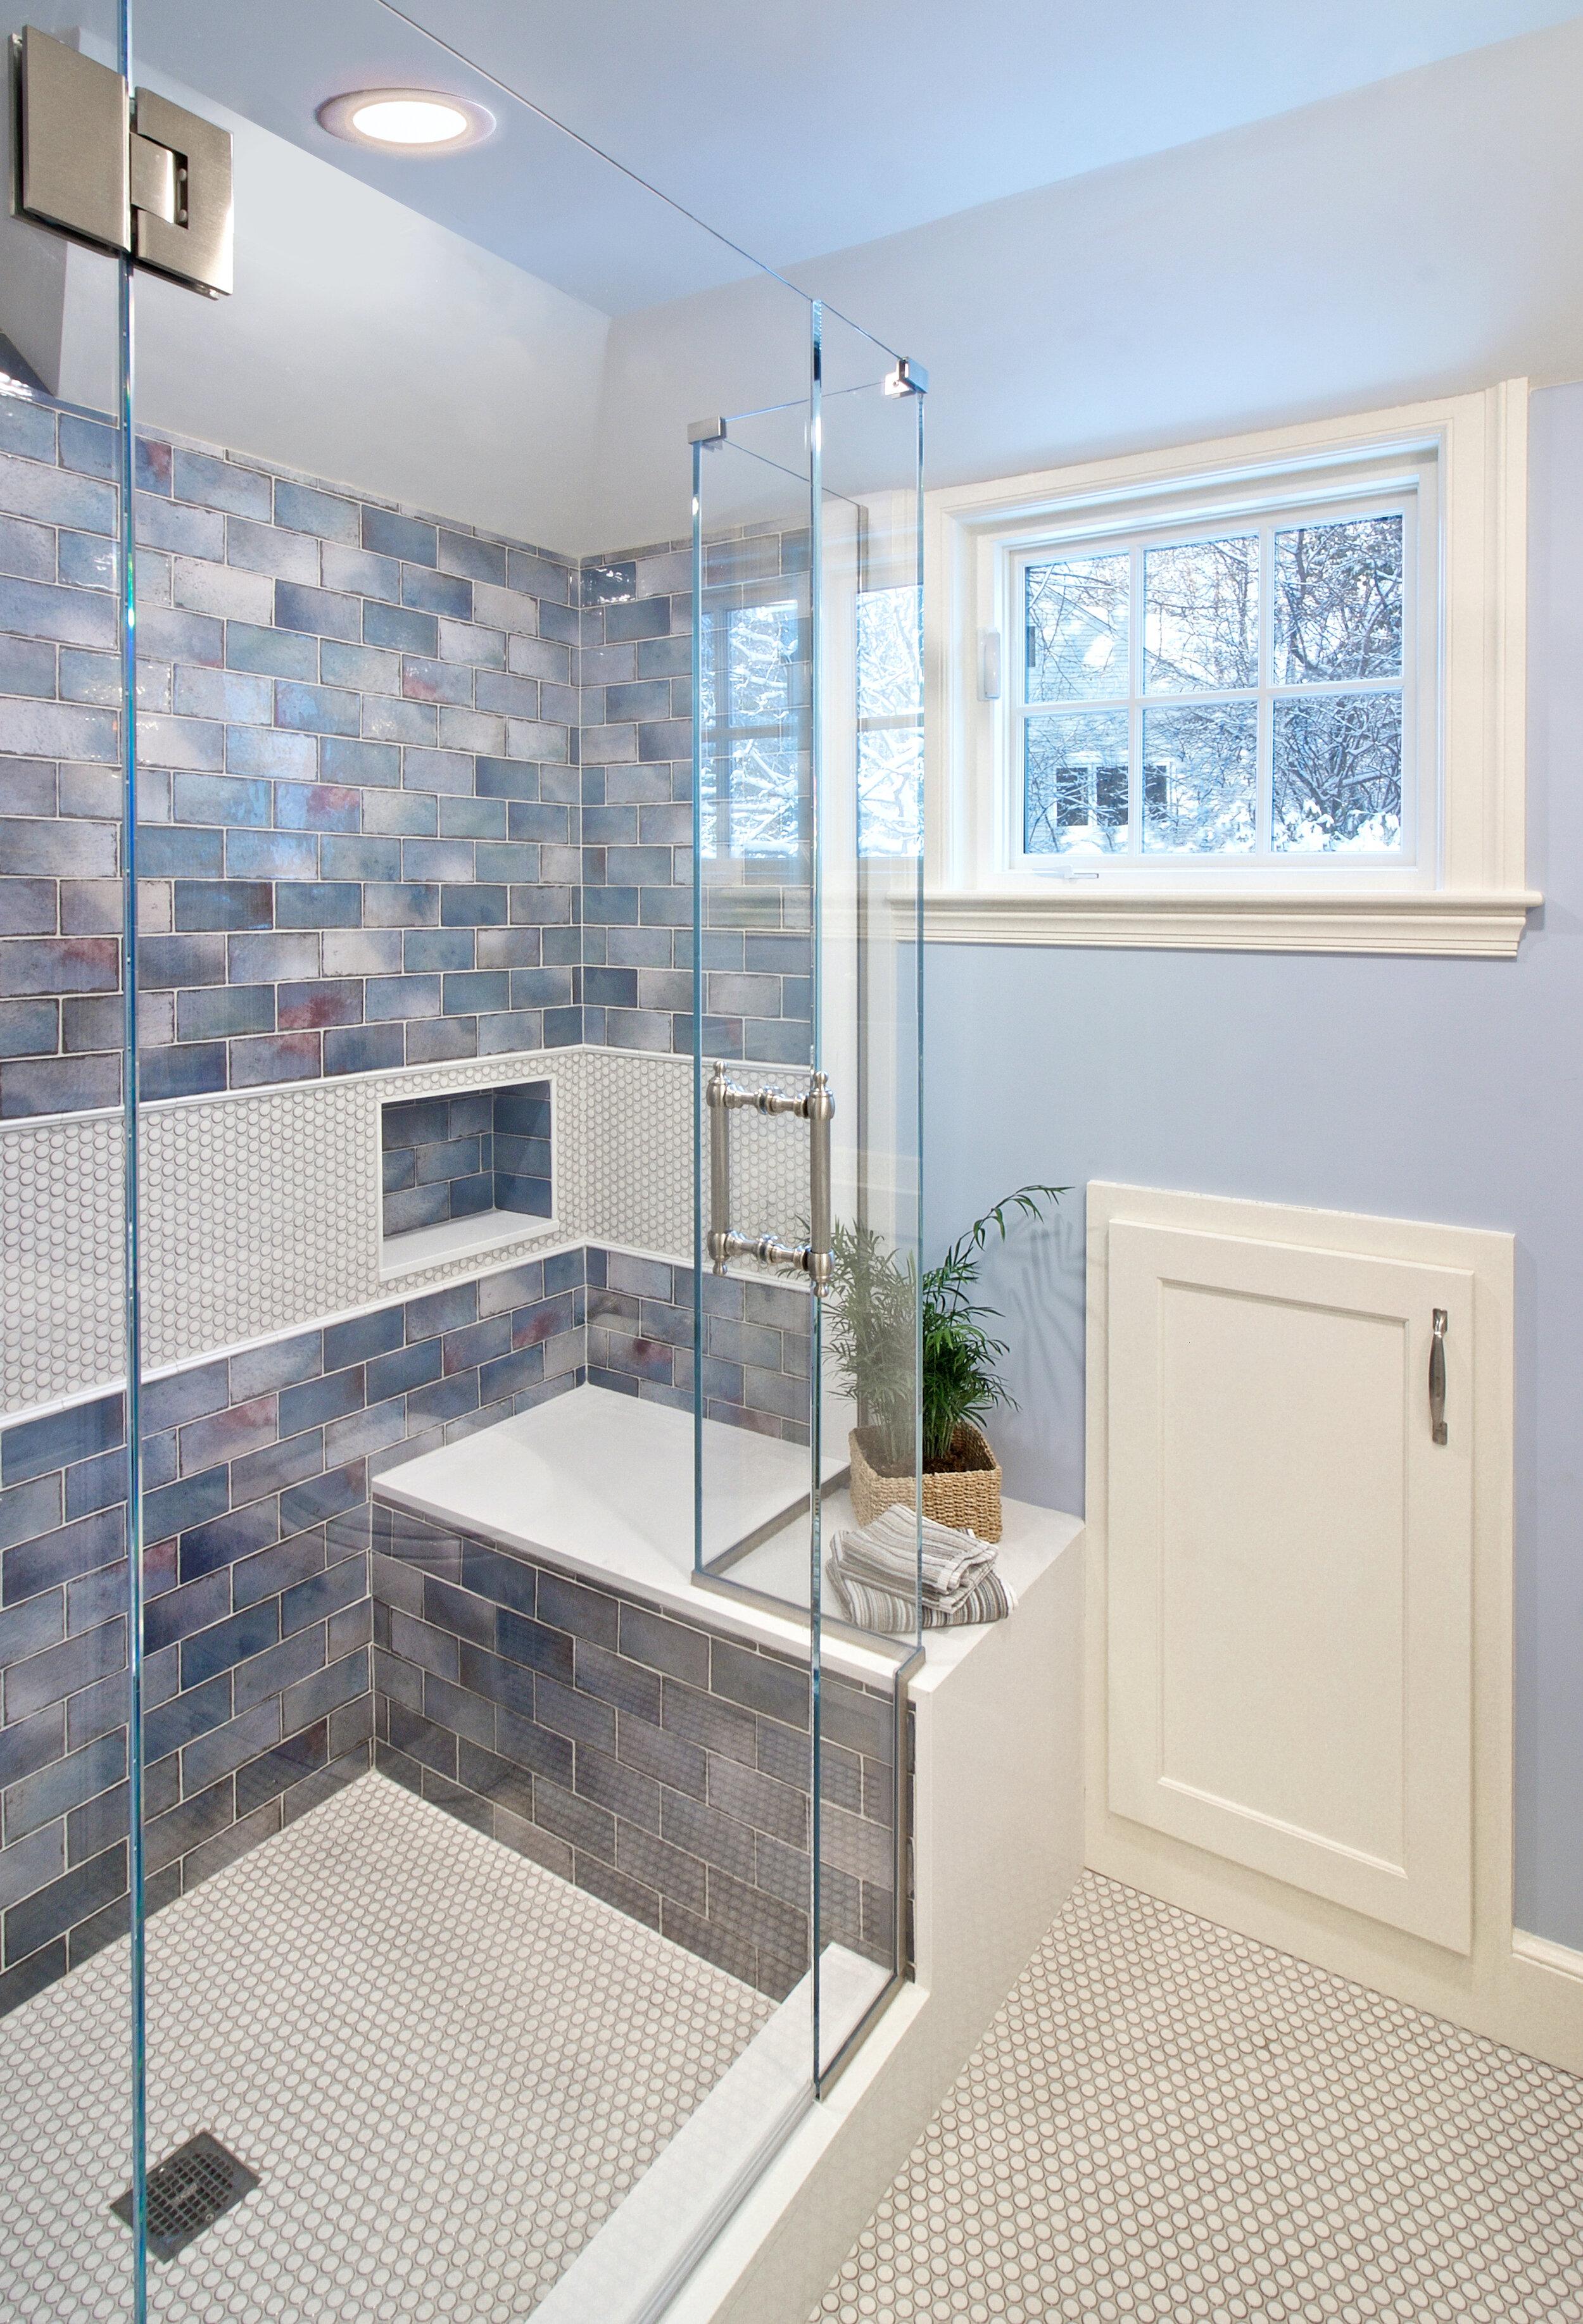 Brookline+Boys+Bathroom+Half-in+Half-out+Shower+Seat+Detail+KitchenVisions+kitchen+bath+designers+space+planners.jpeg